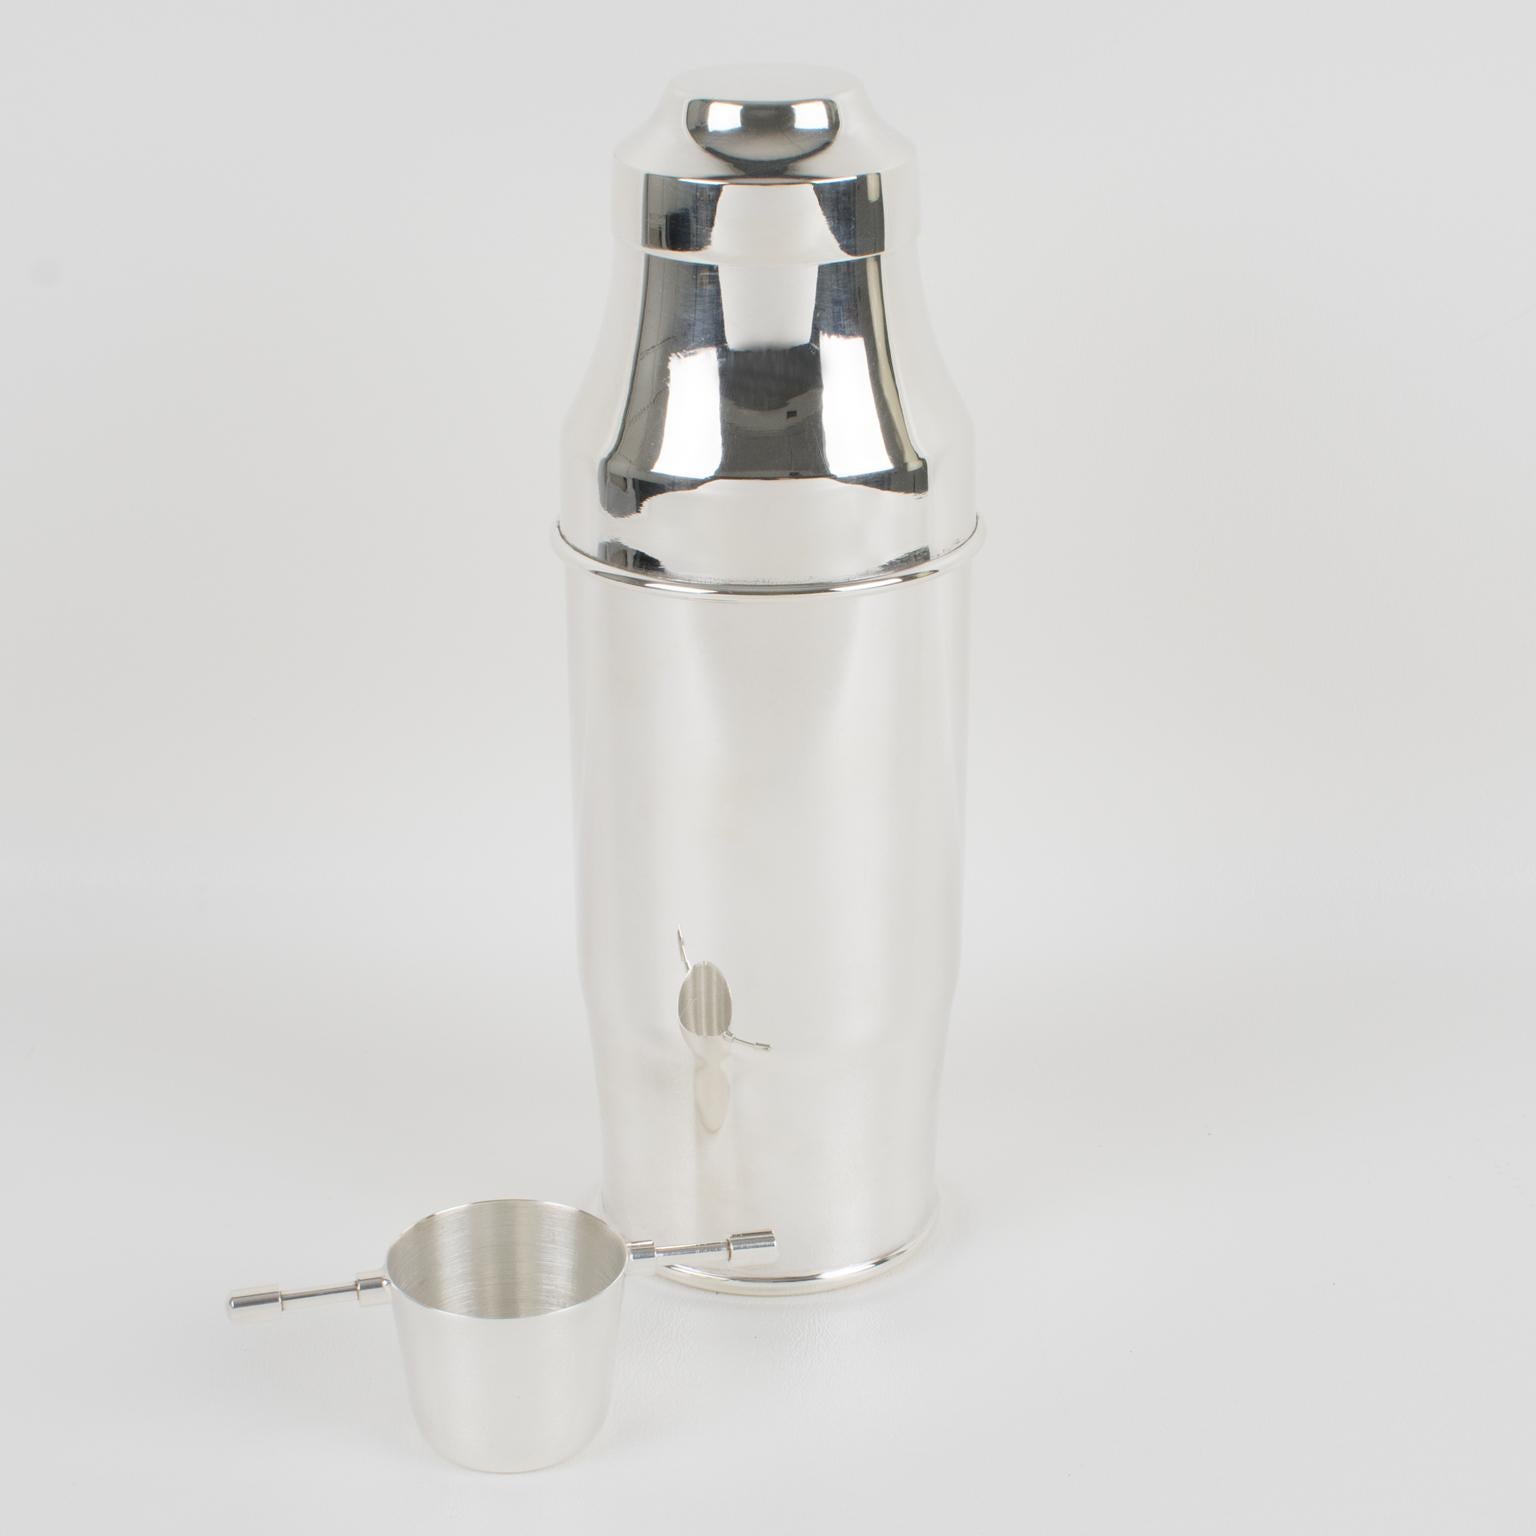 Elegant Mid-Century silver plate cylindrical cocktail or Martini shaker by silversmith Bellini, Brazil. Three-sectioned bullet-shaped designed cocktail shaker with removable cover cap and tapered strainer. It comes with its original silverplate 1.5